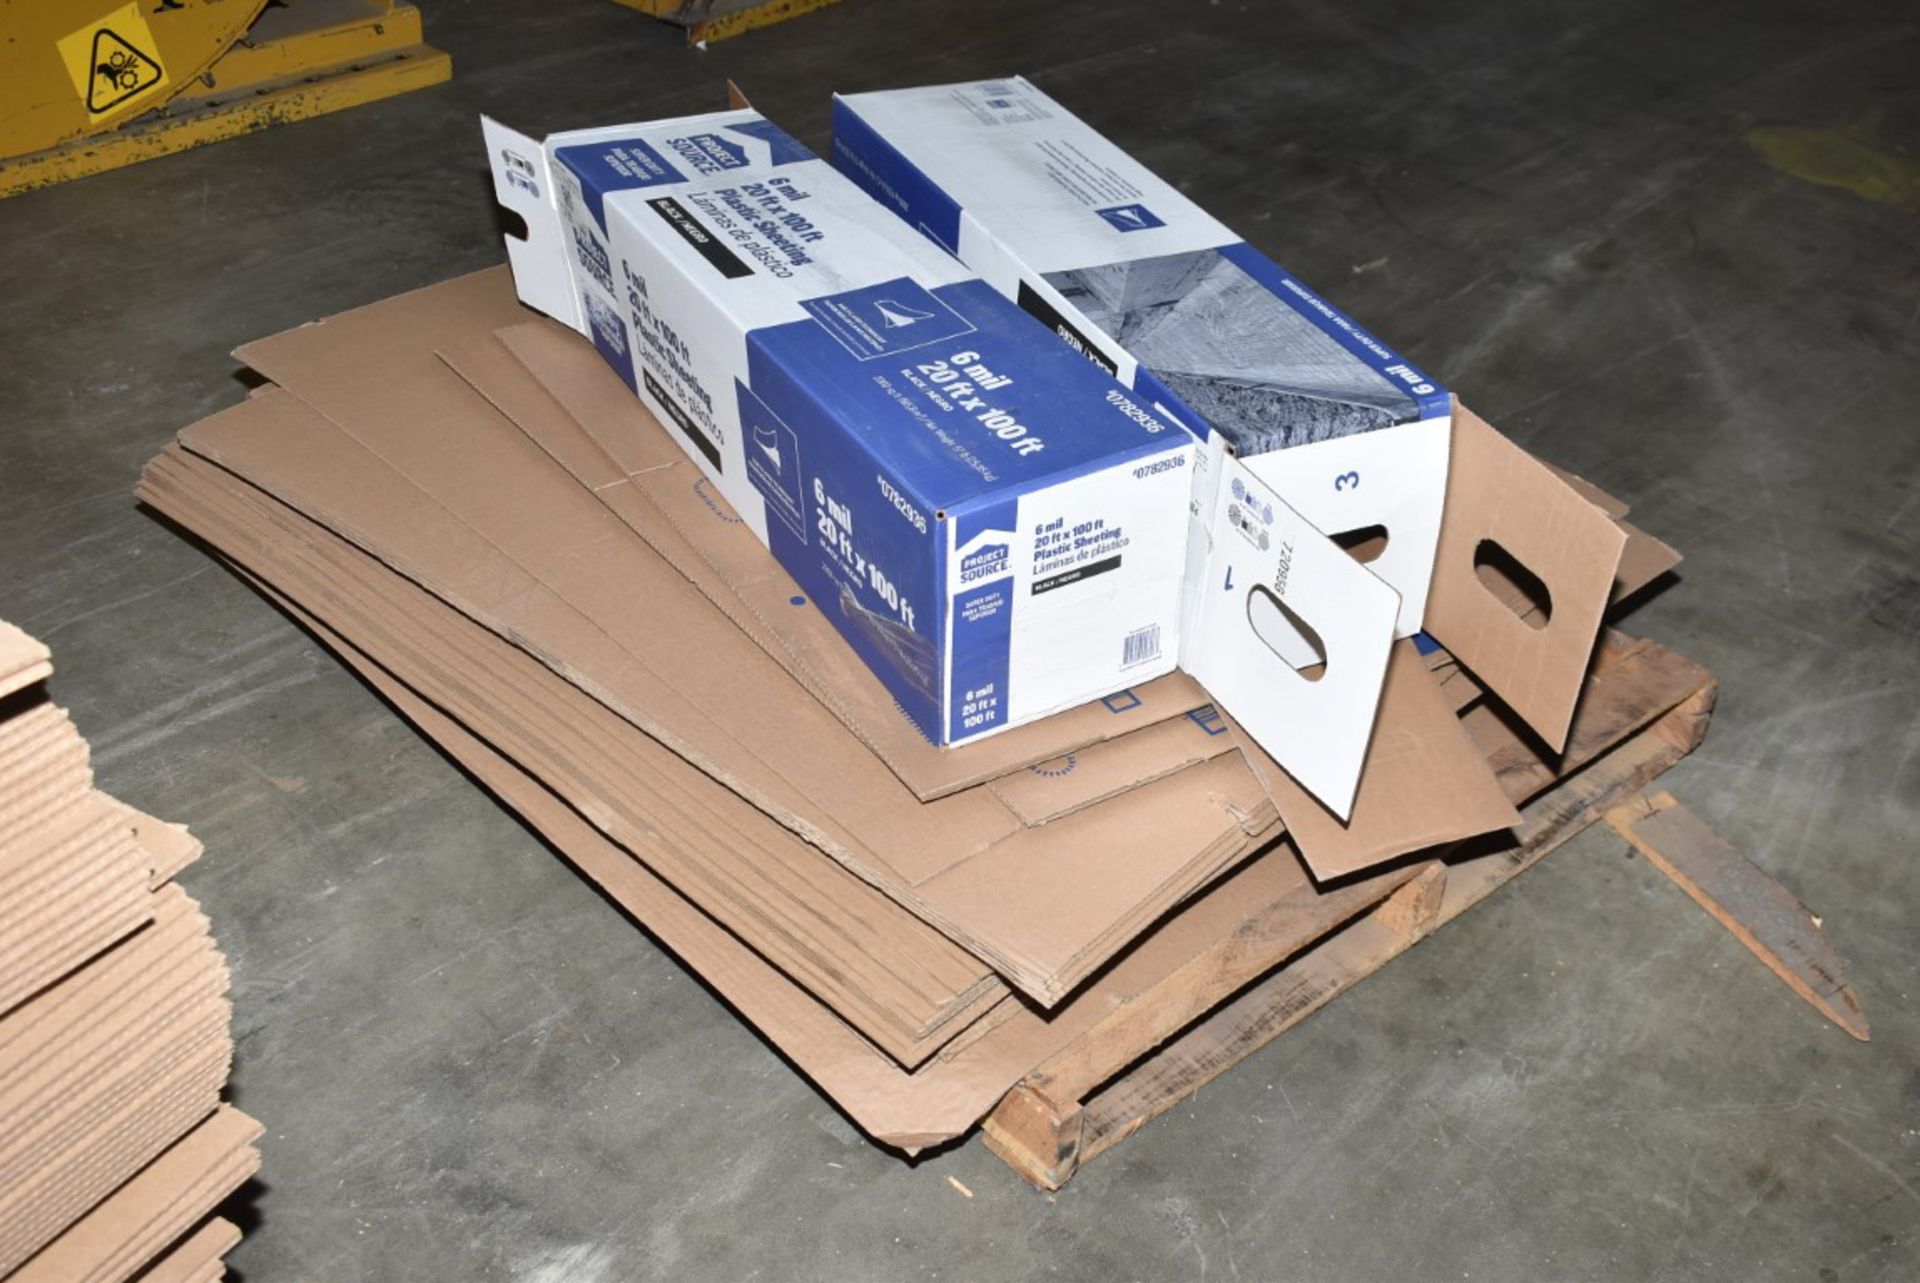 LOT/ PACKAGING SUPPLIES - INCLUDING PLASTIC SHEETING, CORRUGATED CARDBOARD SHIPPING CARTONS [RIGGING - Image 4 of 6